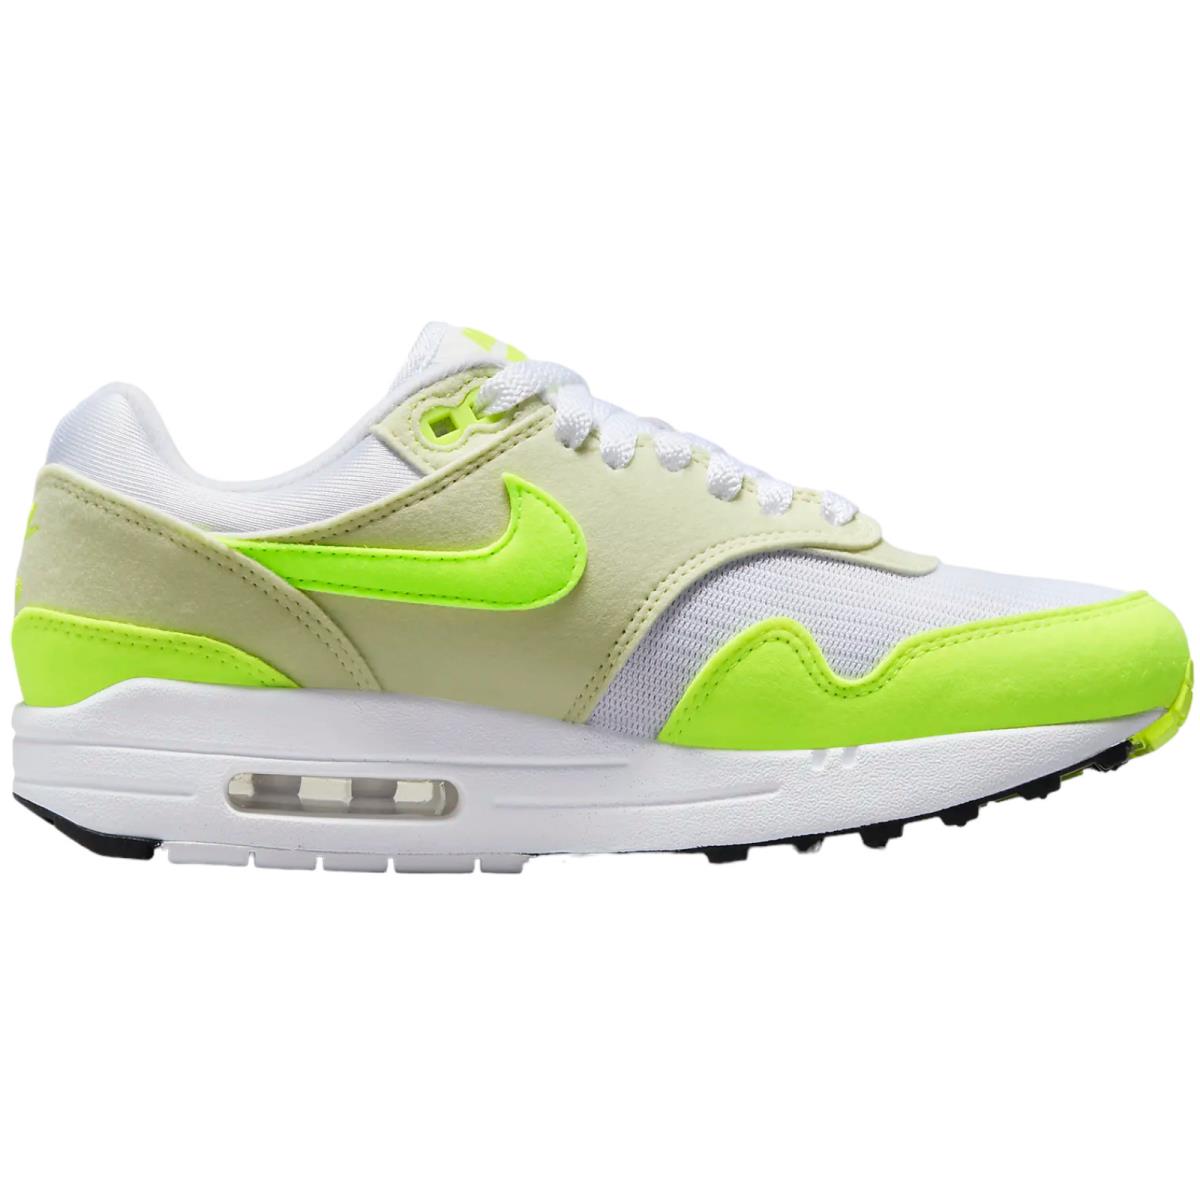 Nike Air Max 1 Women`s Casual Shoes All Colors US Sizes 6-11 White/Sea Glass/Black/Volt